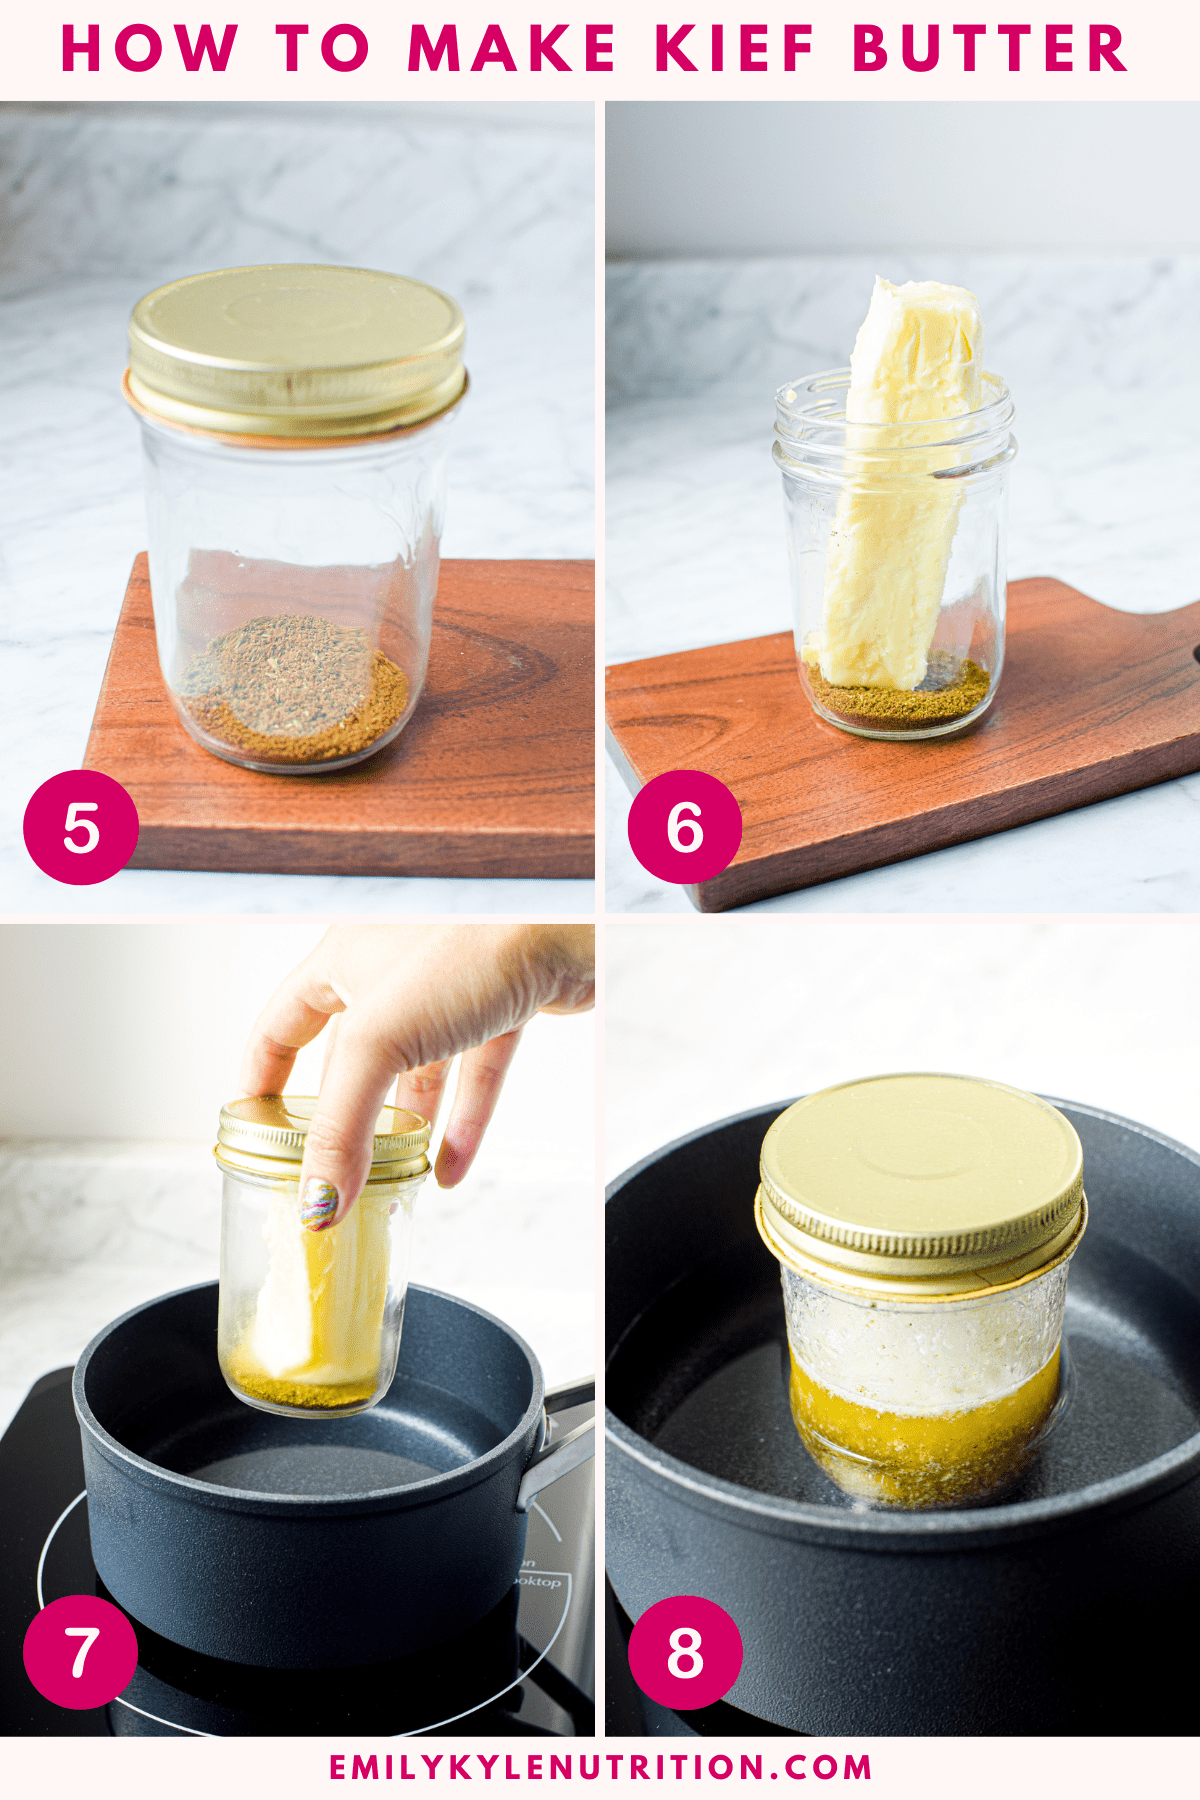 A four step image collage showing how to make kief butter.